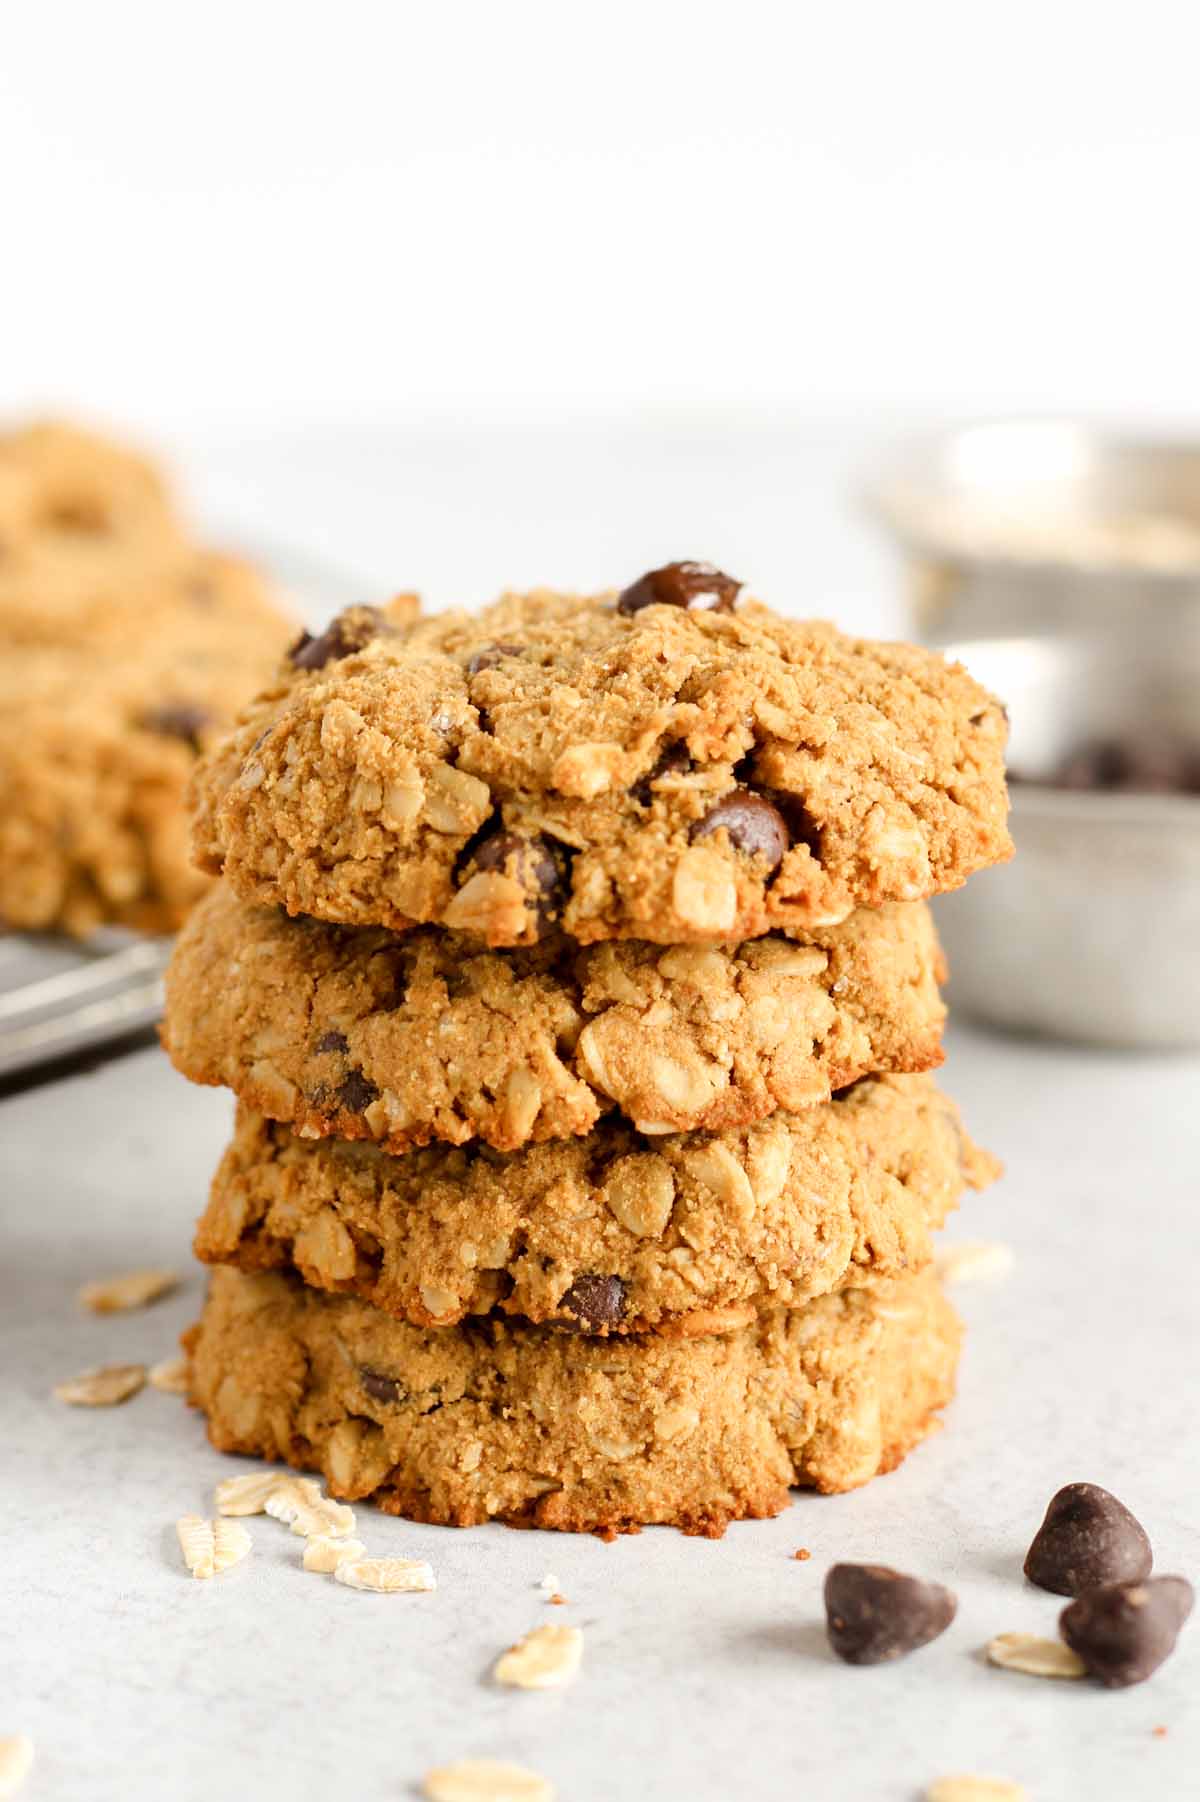 Oatmeal coconut flour cookies stacked 4 high.